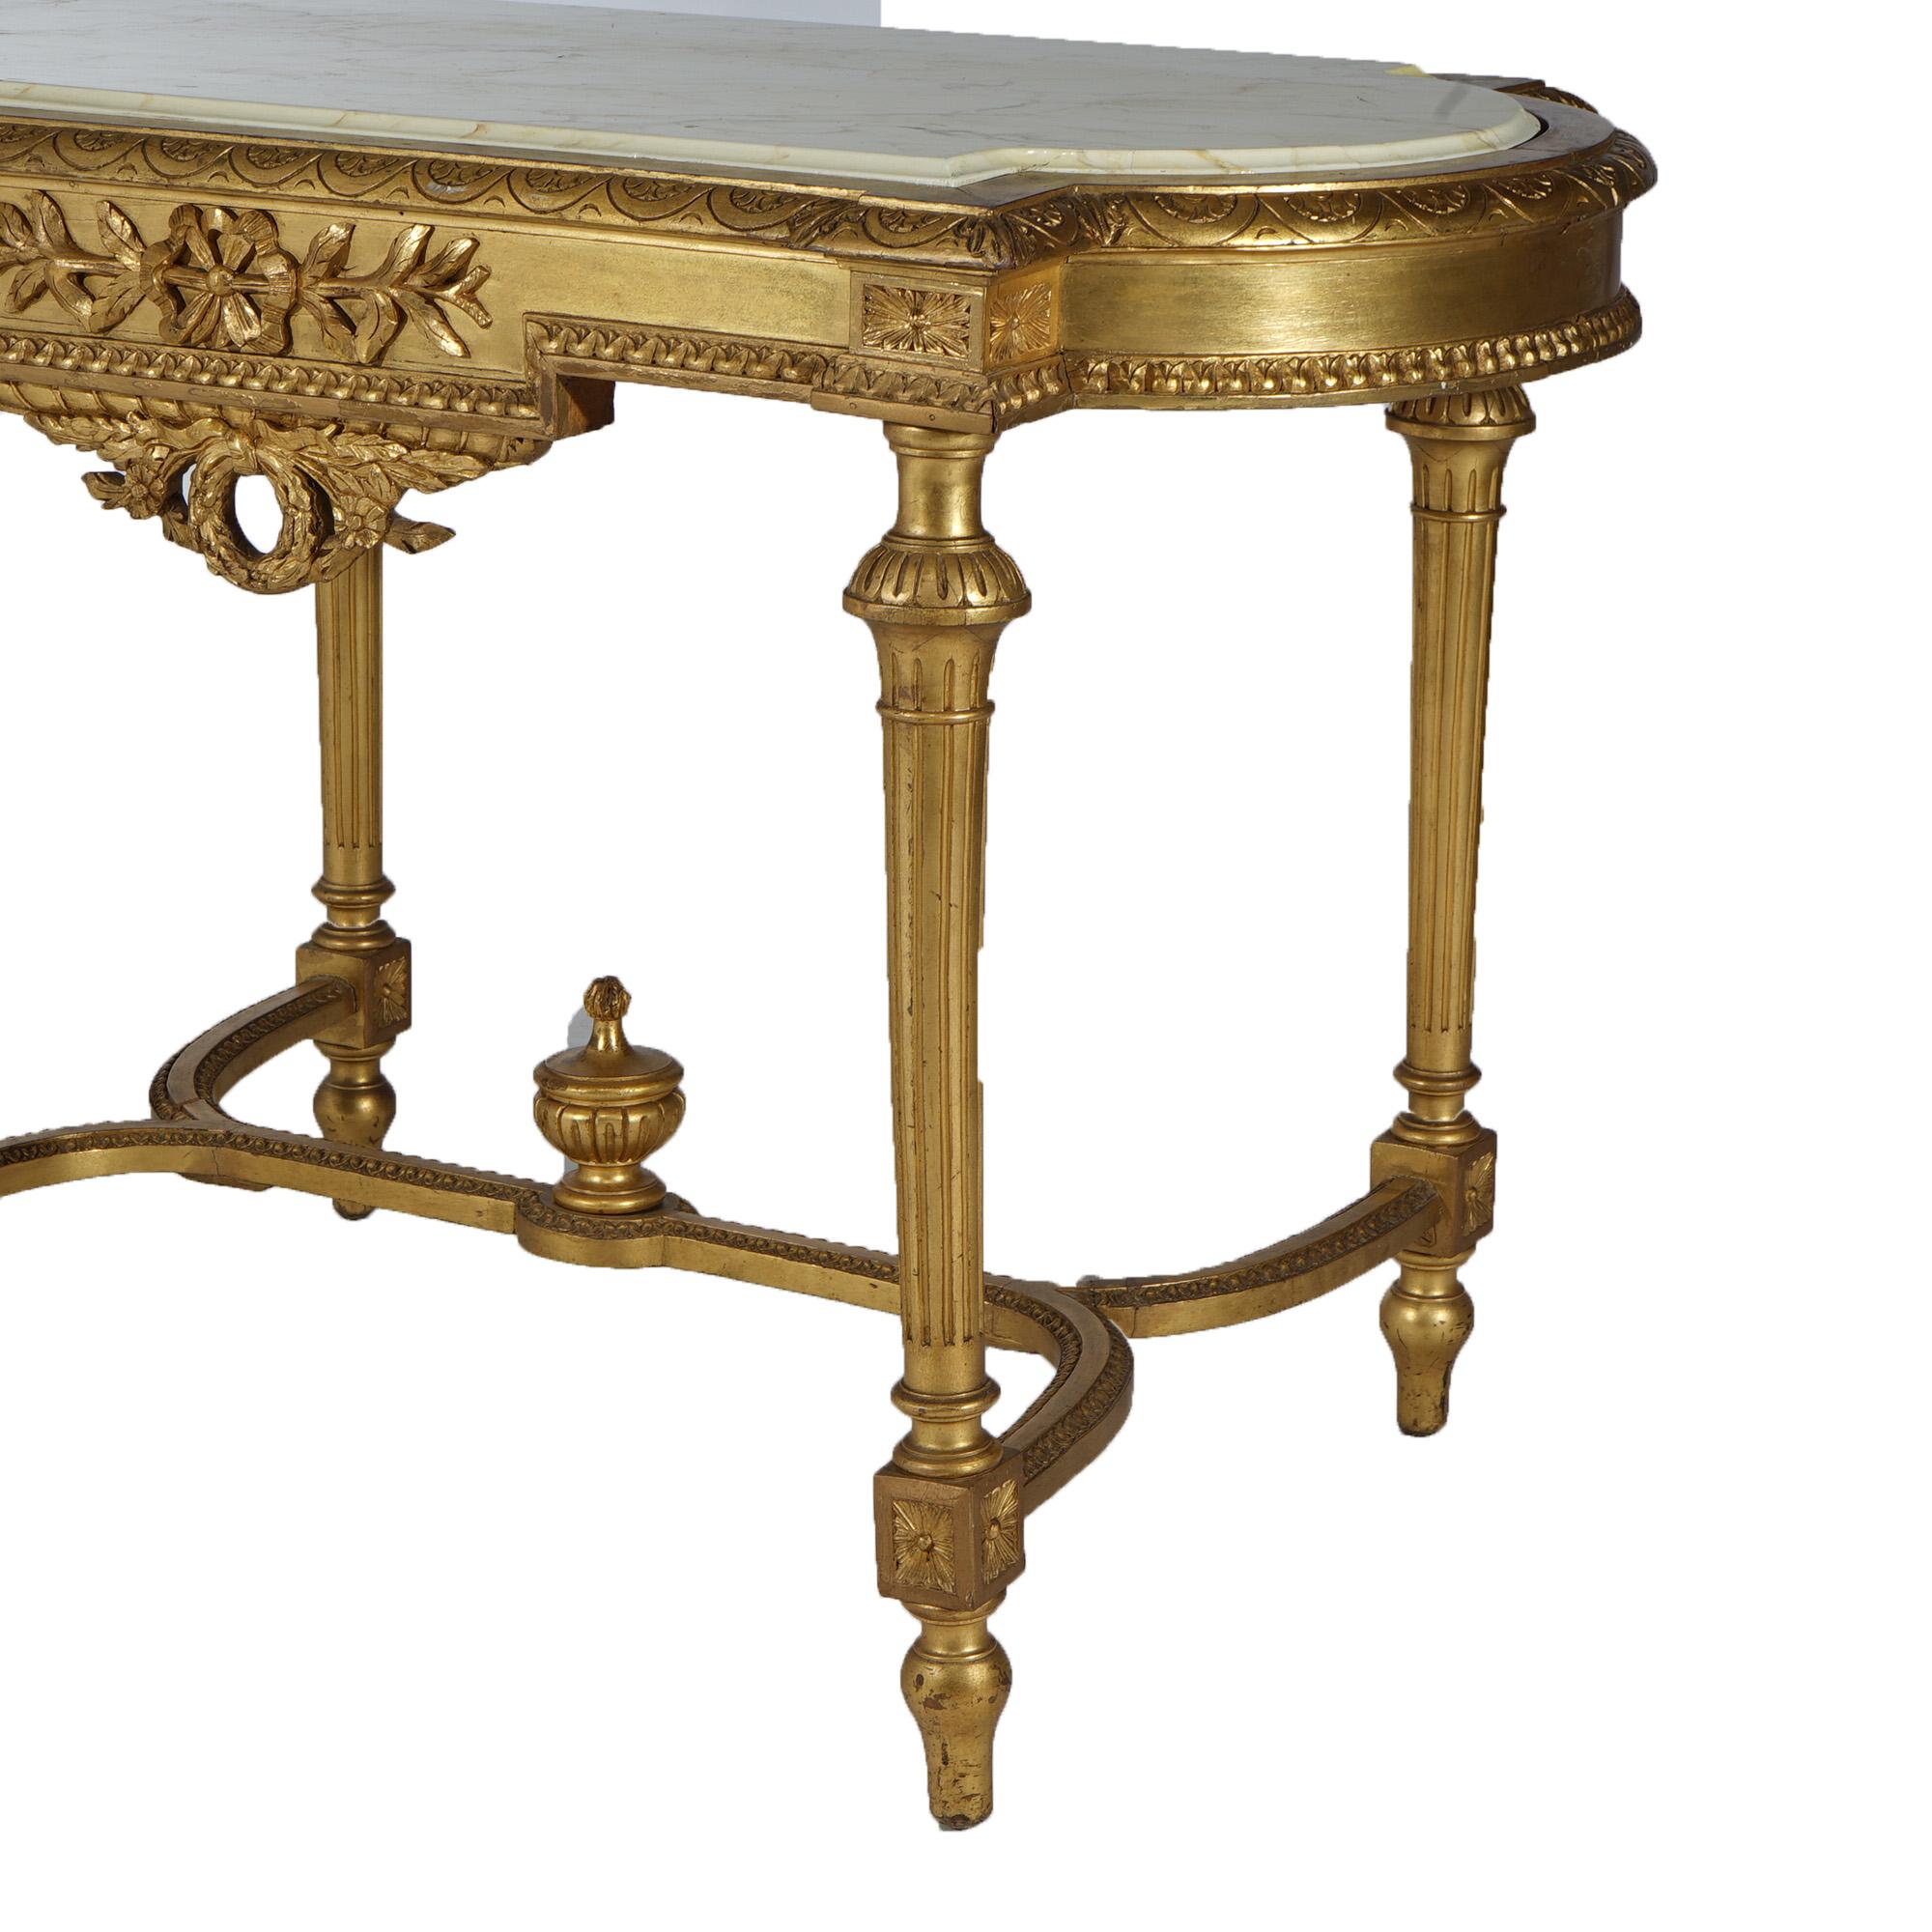 Antique French Louis XVI Style Giltwood Parlor Table with Faux Painted Top 19thC For Sale 3